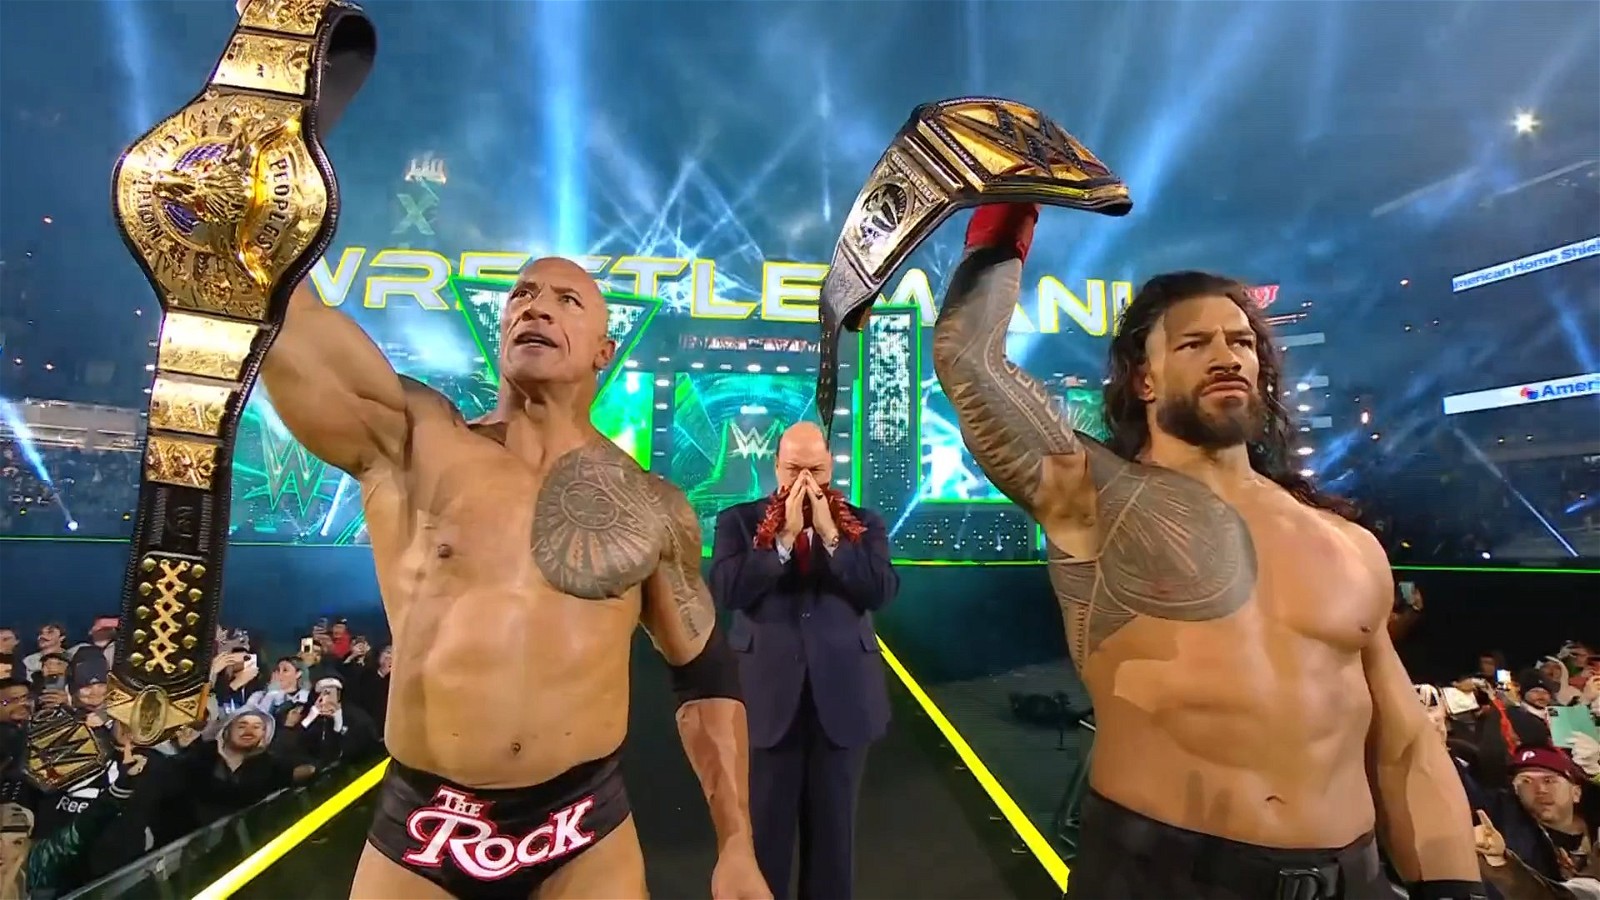 The Rock and Roman Reigns in WrestleMania 40 | Image: WWE/X